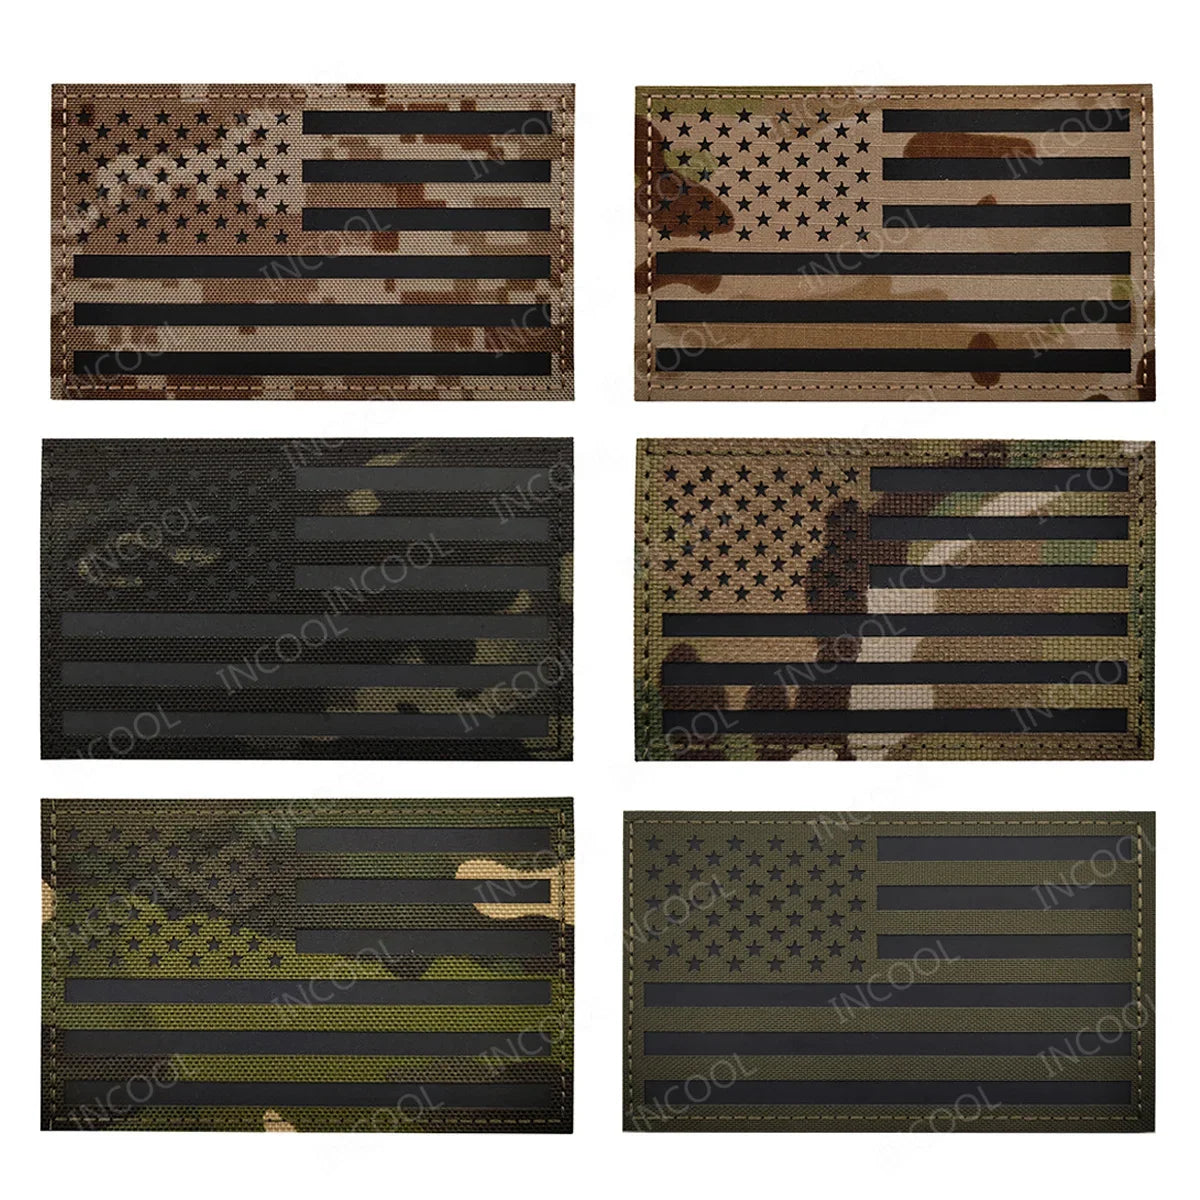 IR Reflective United States American US USA Flag Patches Tactical Military Emblem Shoulder Luminous Infrared Multicam Badges